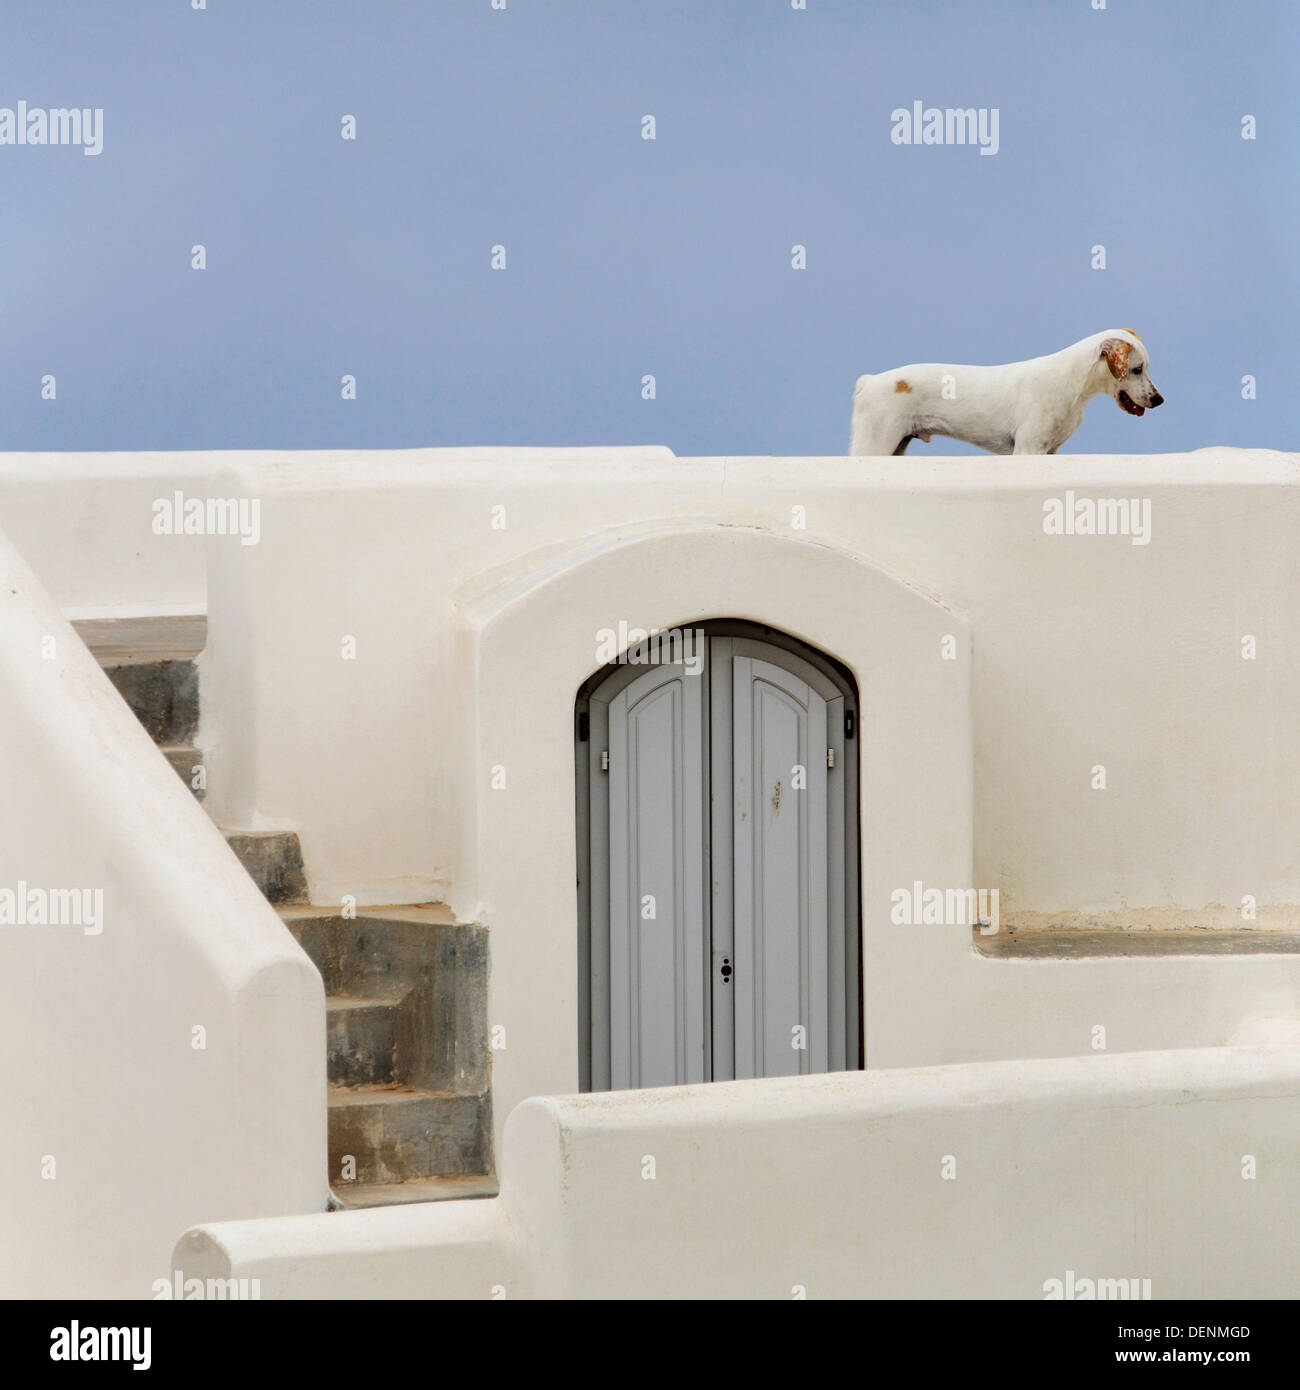 Stray dog in the terrace of a typical cycladic house in Imerovigli, Santorini island, Greece. Stock Photo